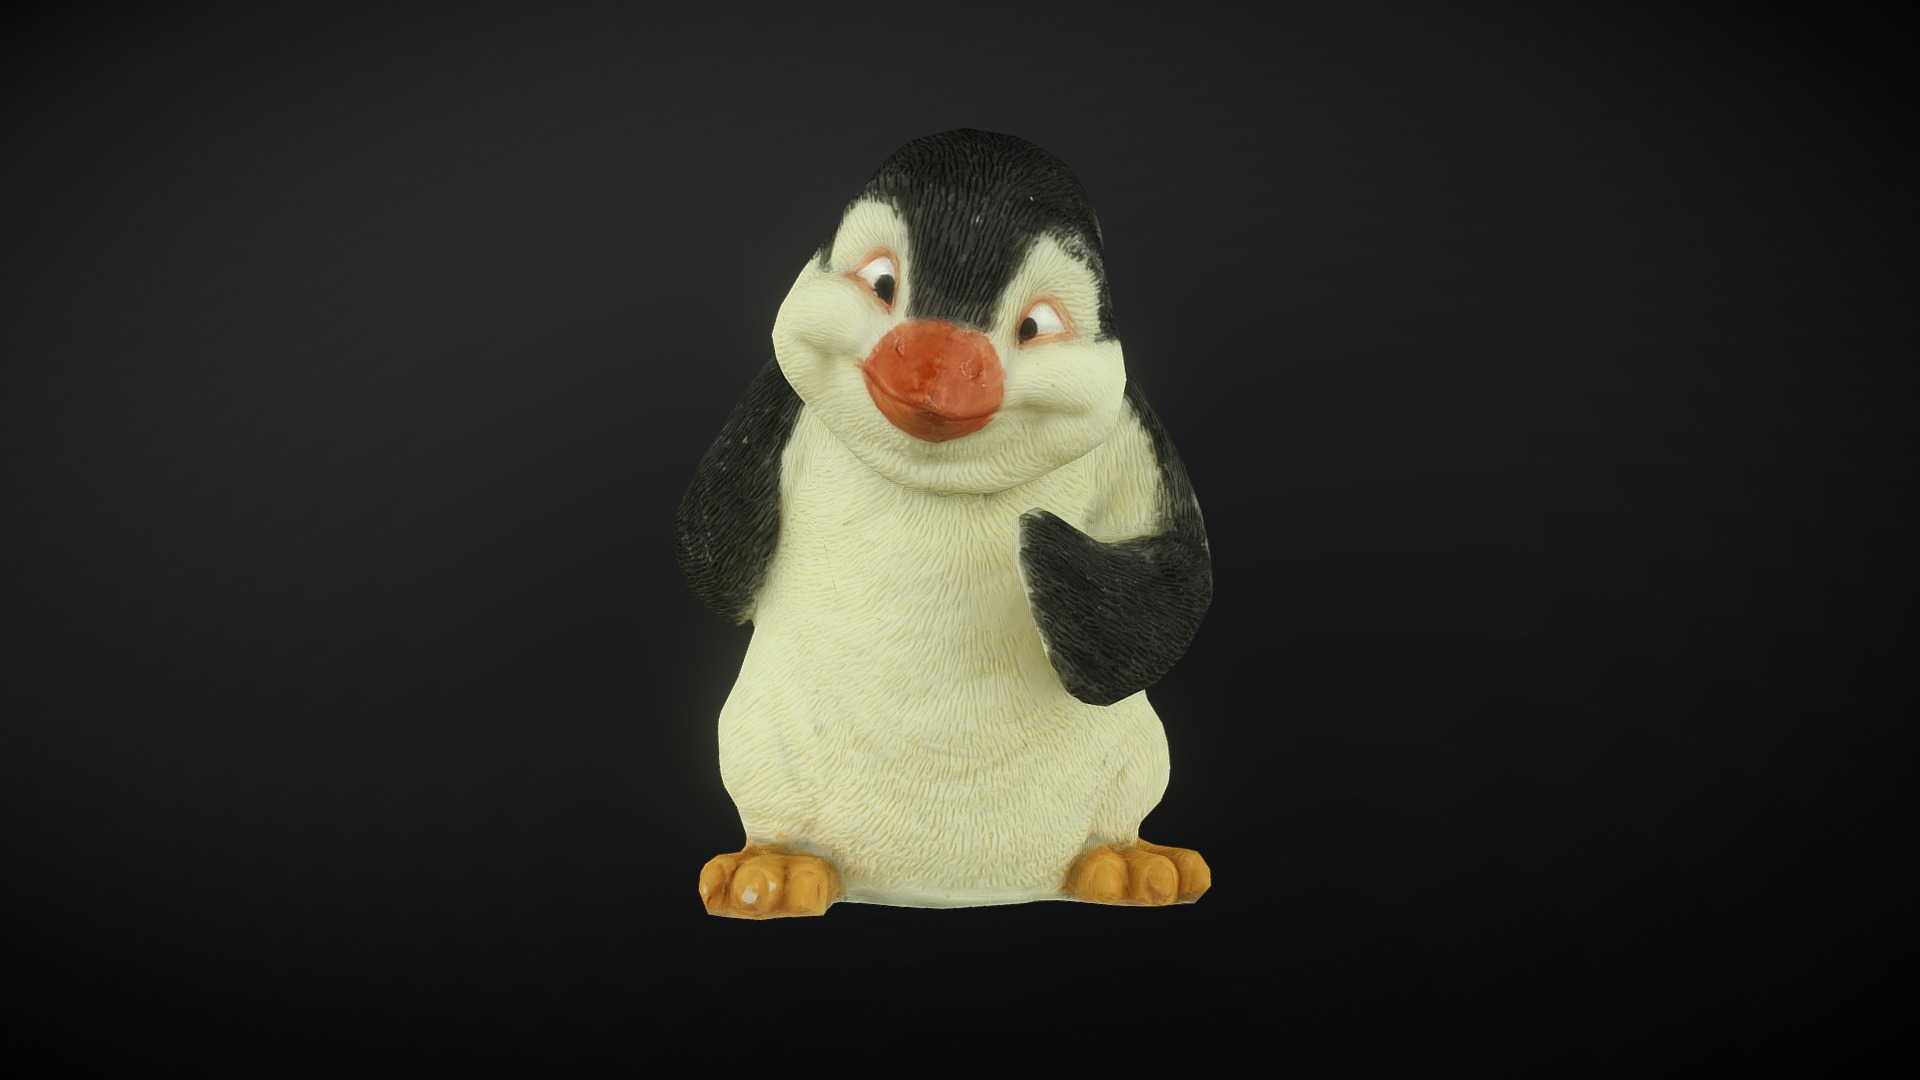 3D model penguin - This is a 3D model of the penguin. The 3D model is about a small white and black bird.